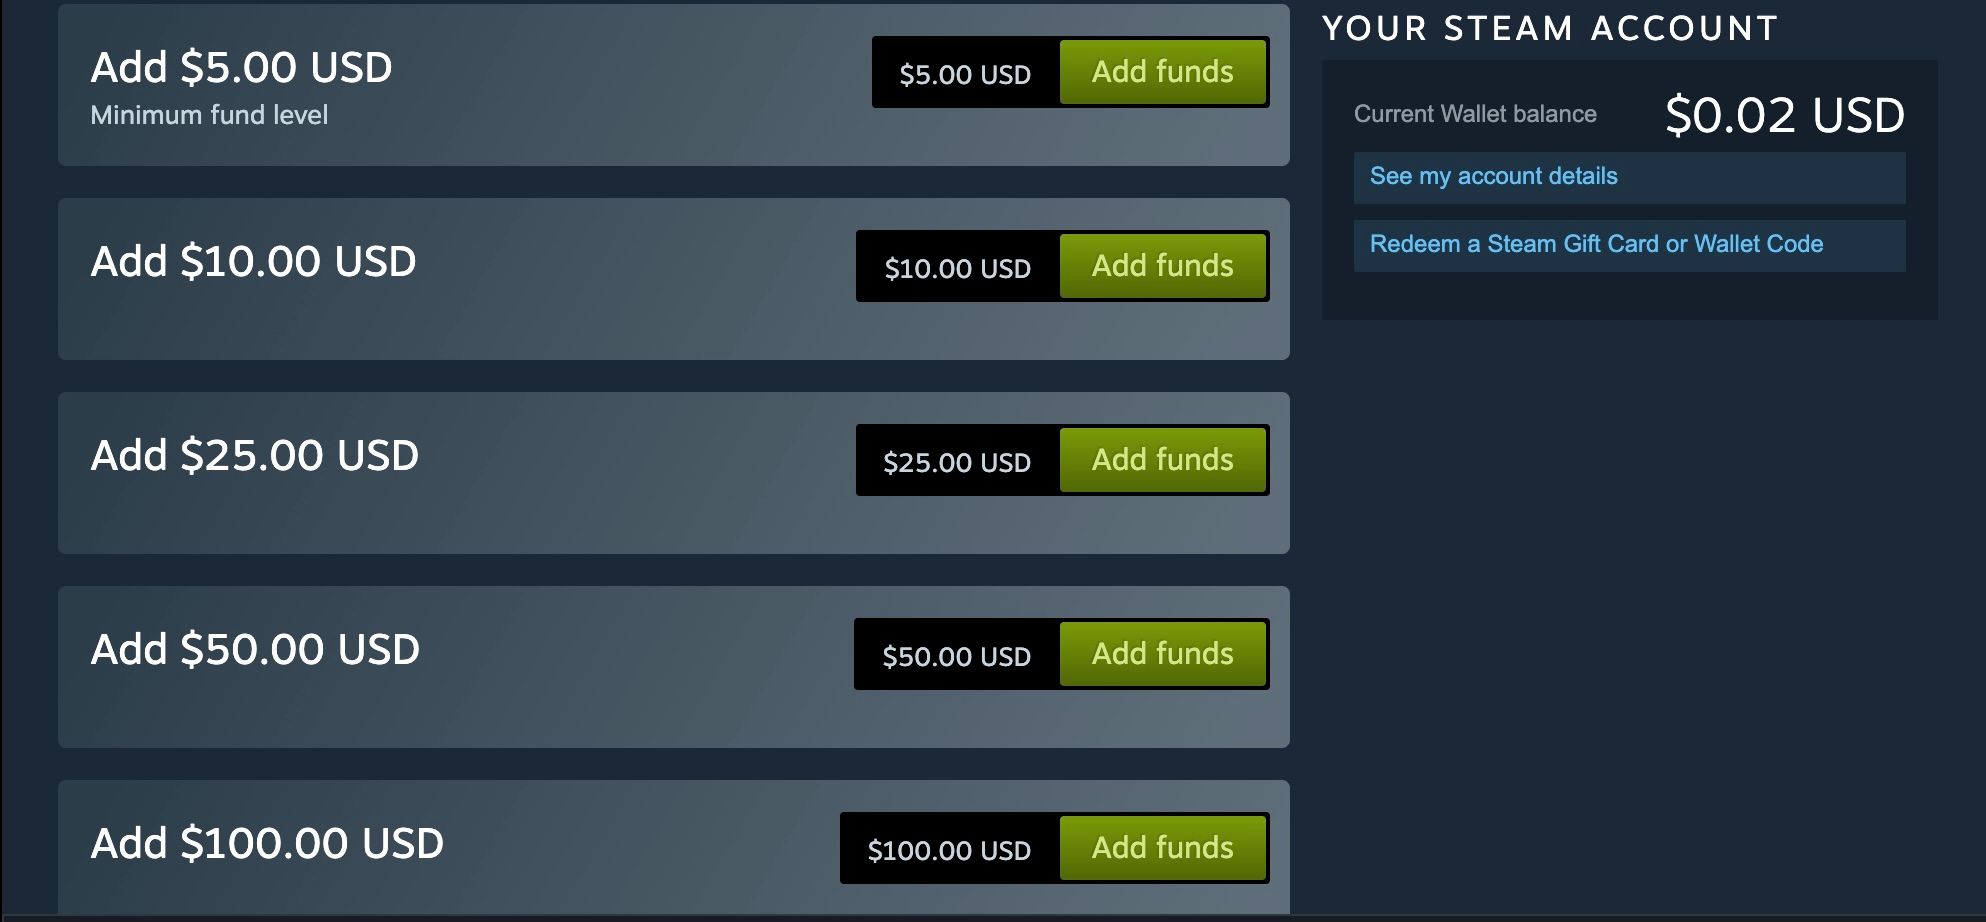 best way to move money from steam wallet?